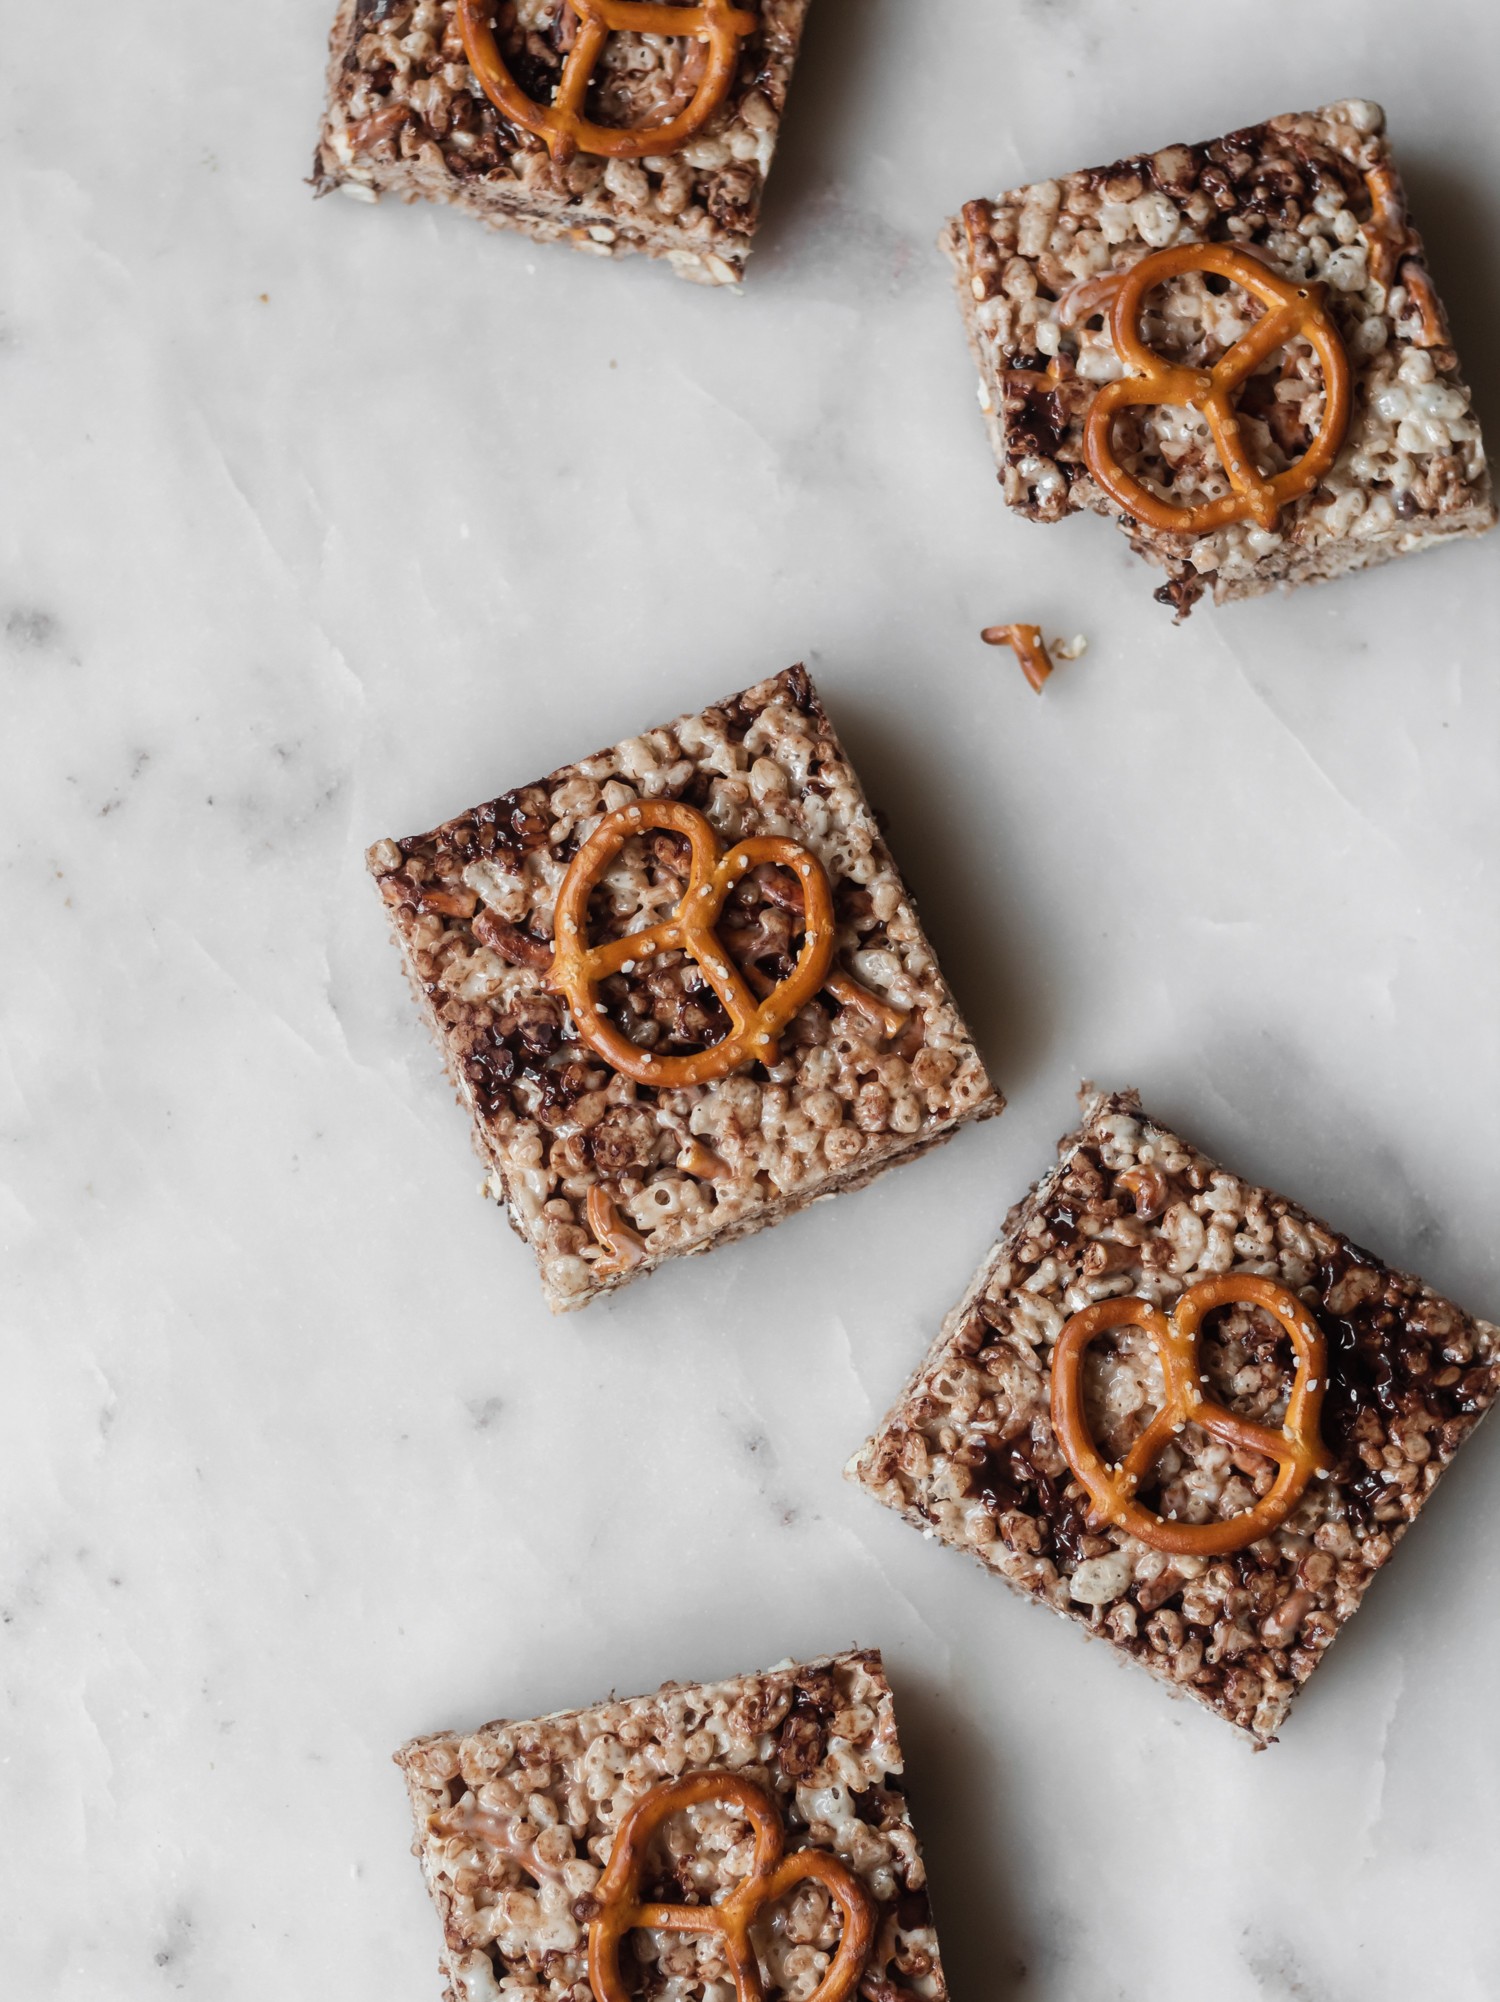 Five cereal bars with chocolate and pretzels on a white marble counter.